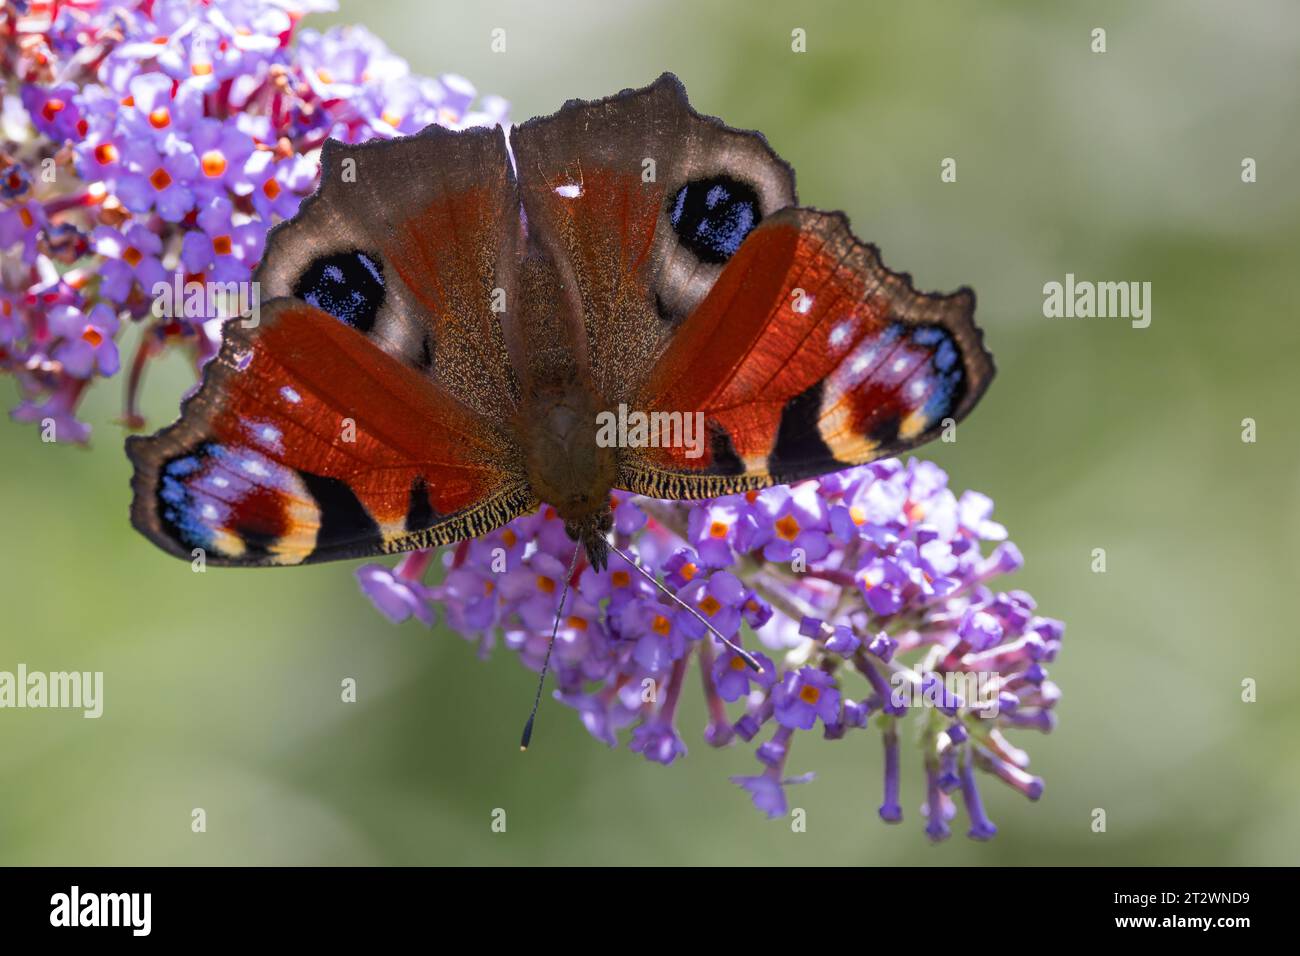 Peacock Butterfly [ Aglais io ] from above on Buddleia flower Stock Photo